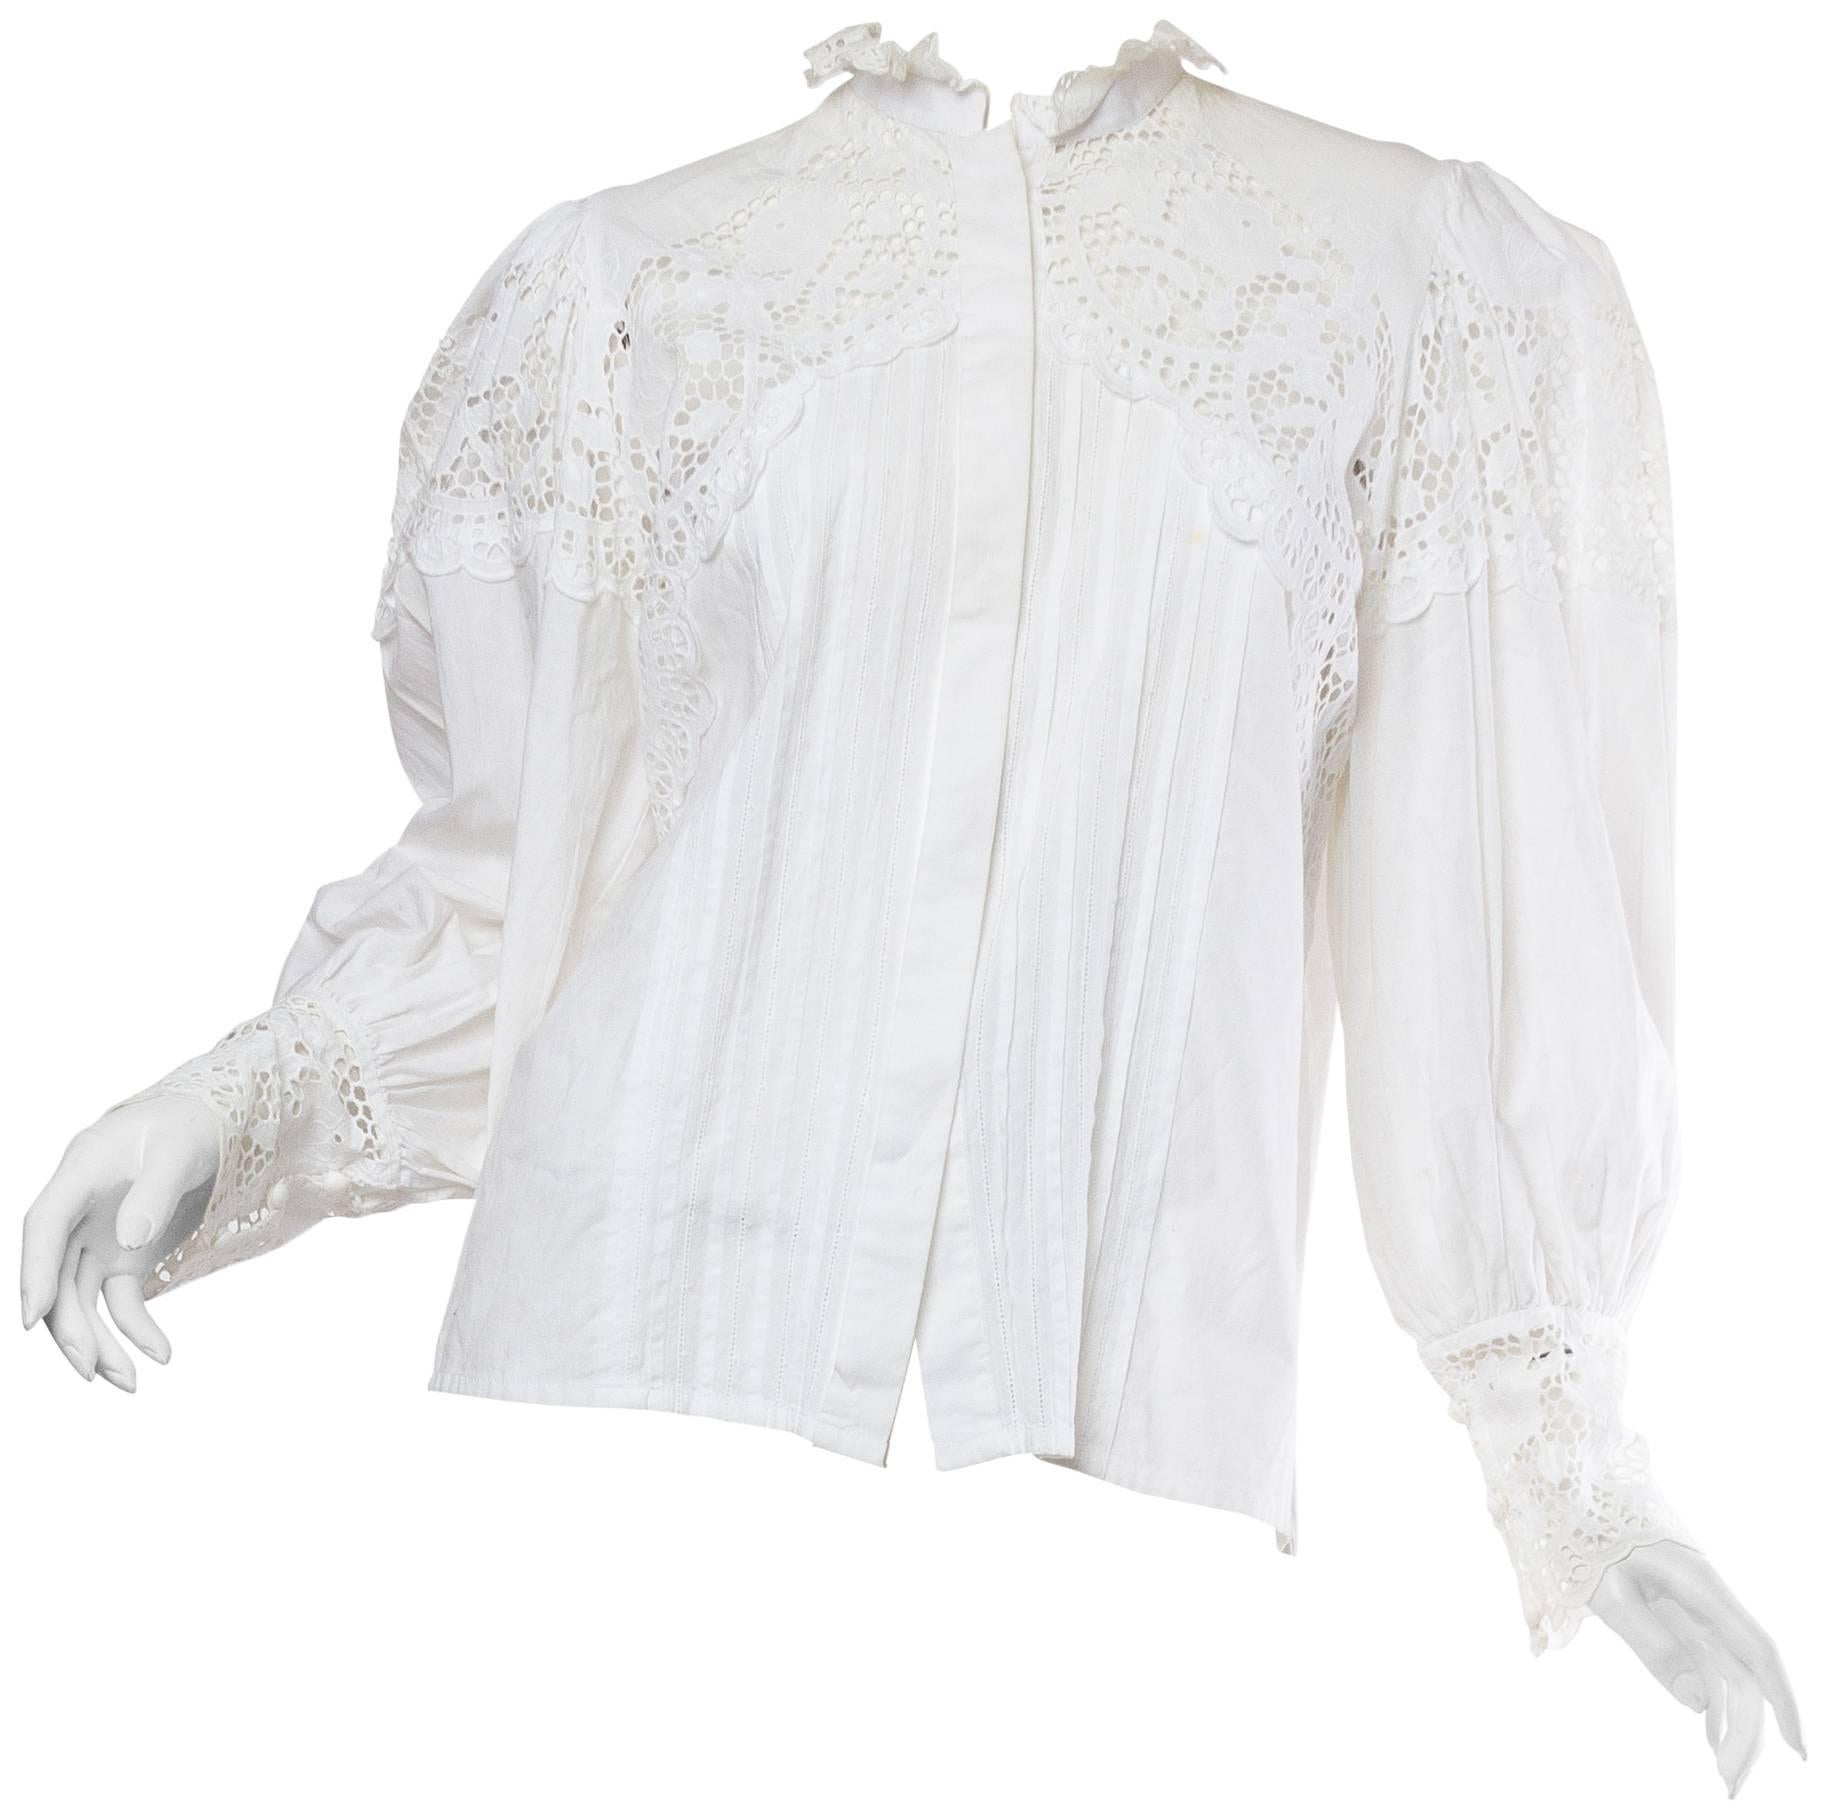 1970s Victorian style Lace Blouse